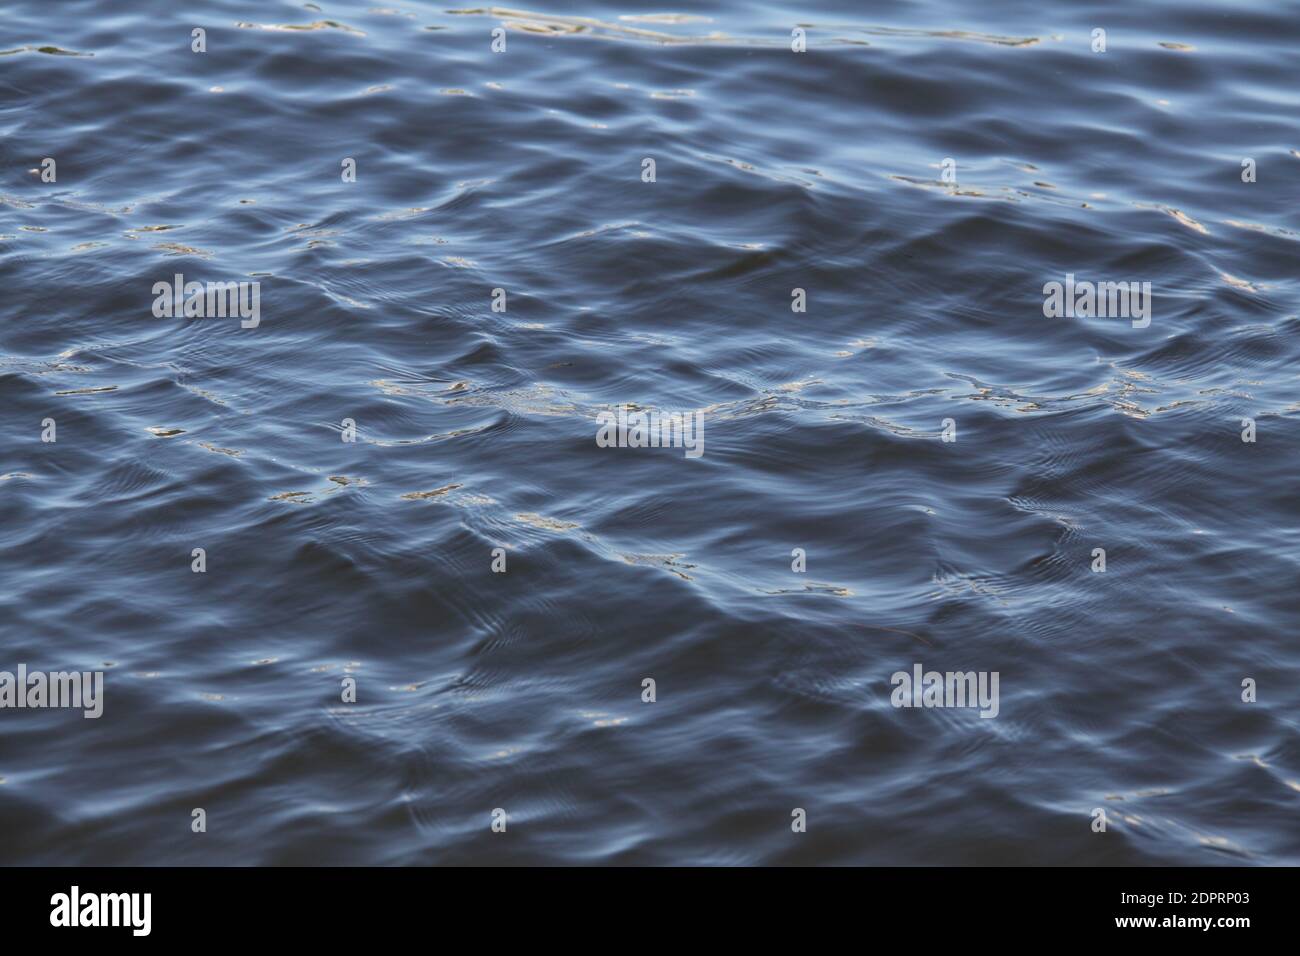 Close-Up View of Gentle Moving Swells of Ocean Sea Stock Photo